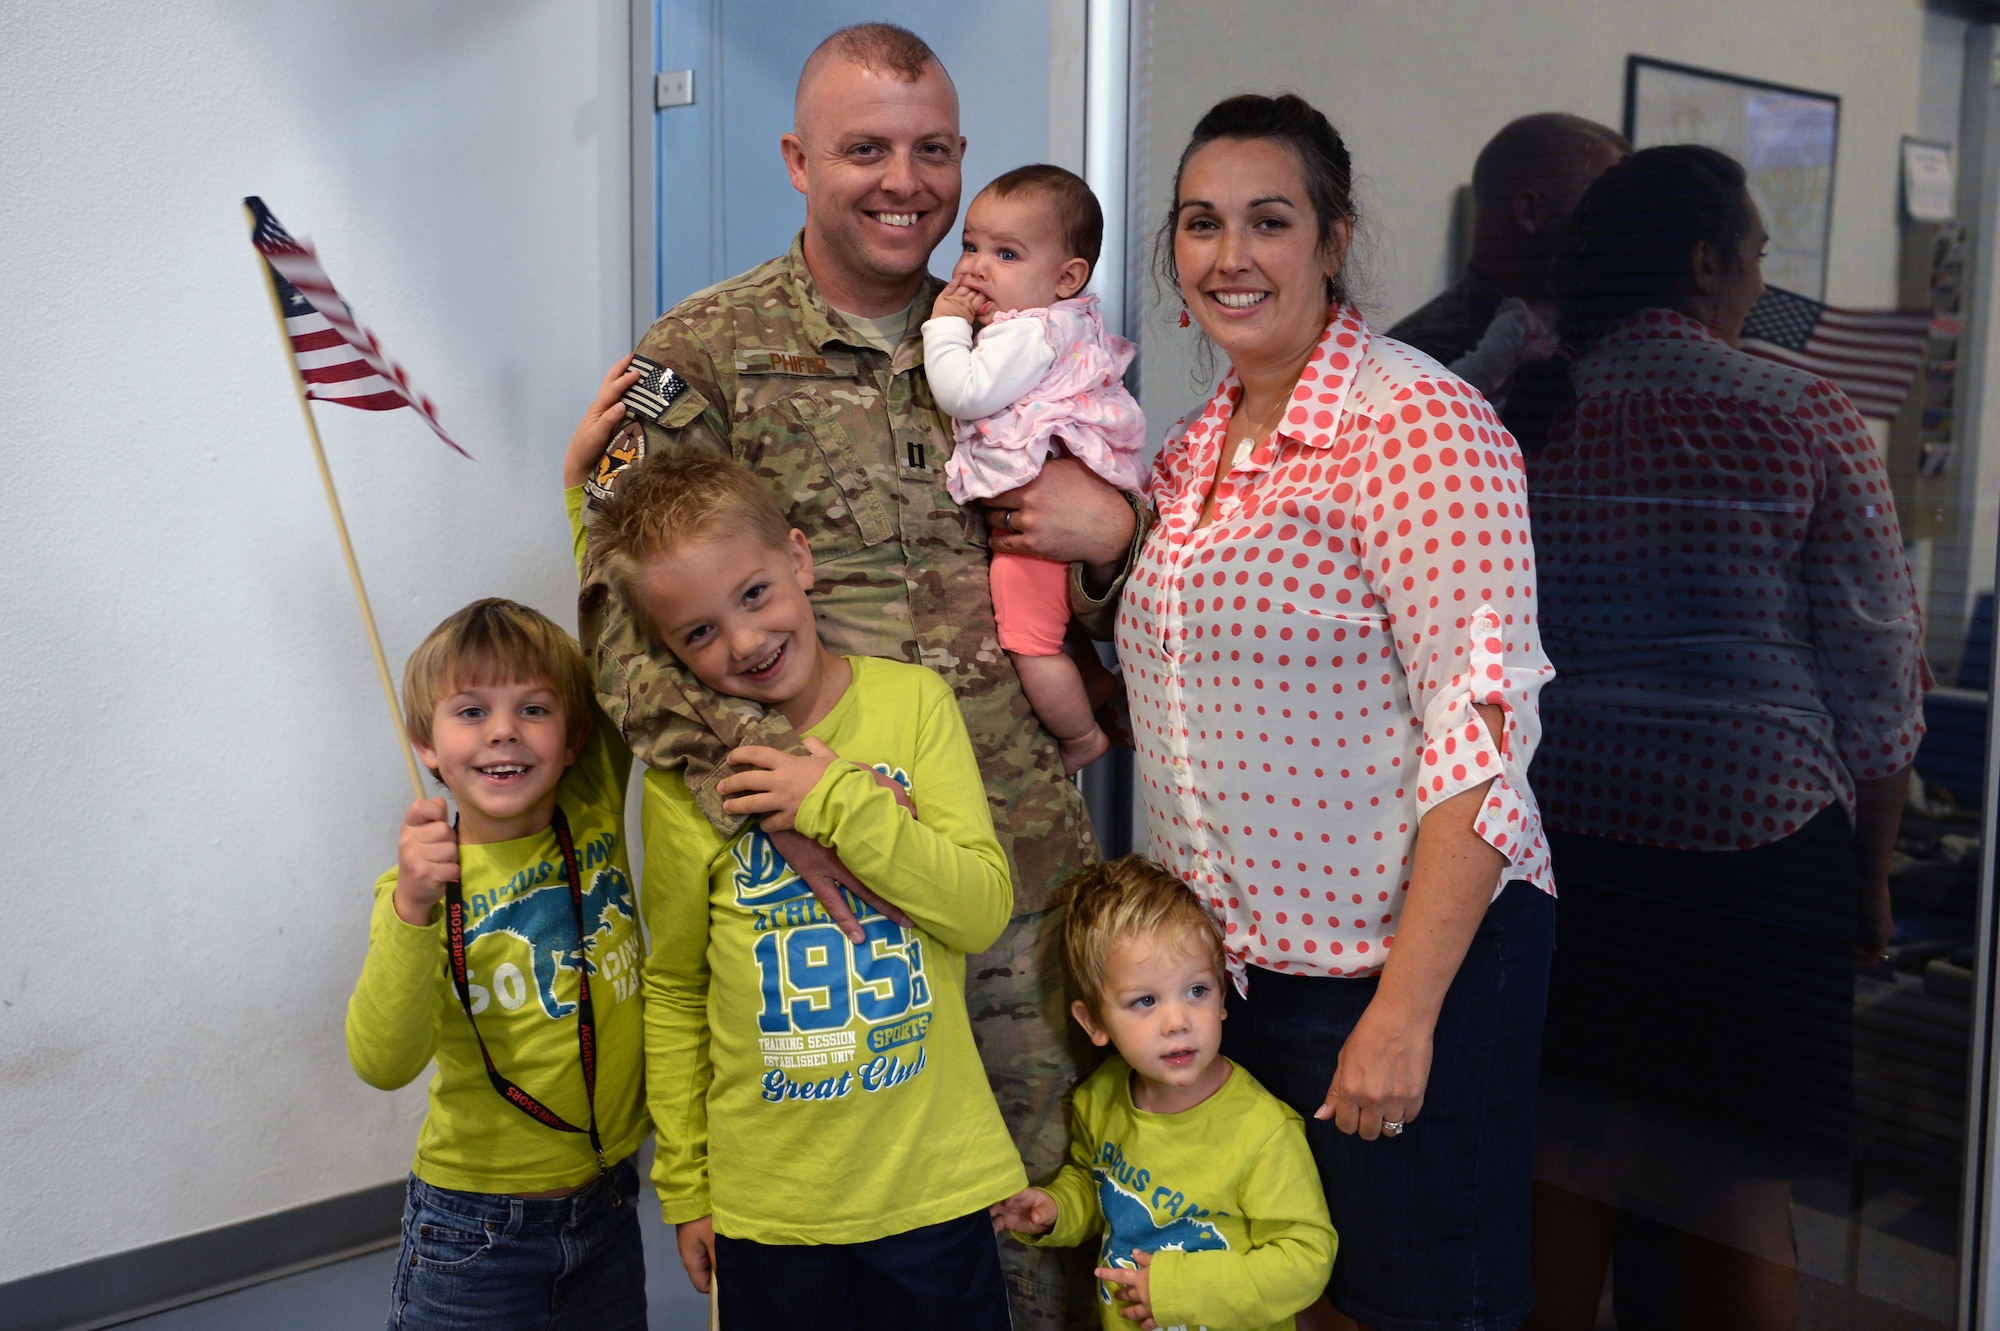 SPANGDAHLEM AIR BASE, Germany — U.S. Air Force Capt. Jeremy Phifer, 480th Aircraft Maintenance Unit officer in charge, gathers with his family Sept. 21, 2013, at a homecoming celebration upon returning from a six-month deployment to Southwest Asia. Families were united with more than 150 Airmen who left in April. (U.S. Air Force photo by Senior Airman Alexis Siekert/Released)